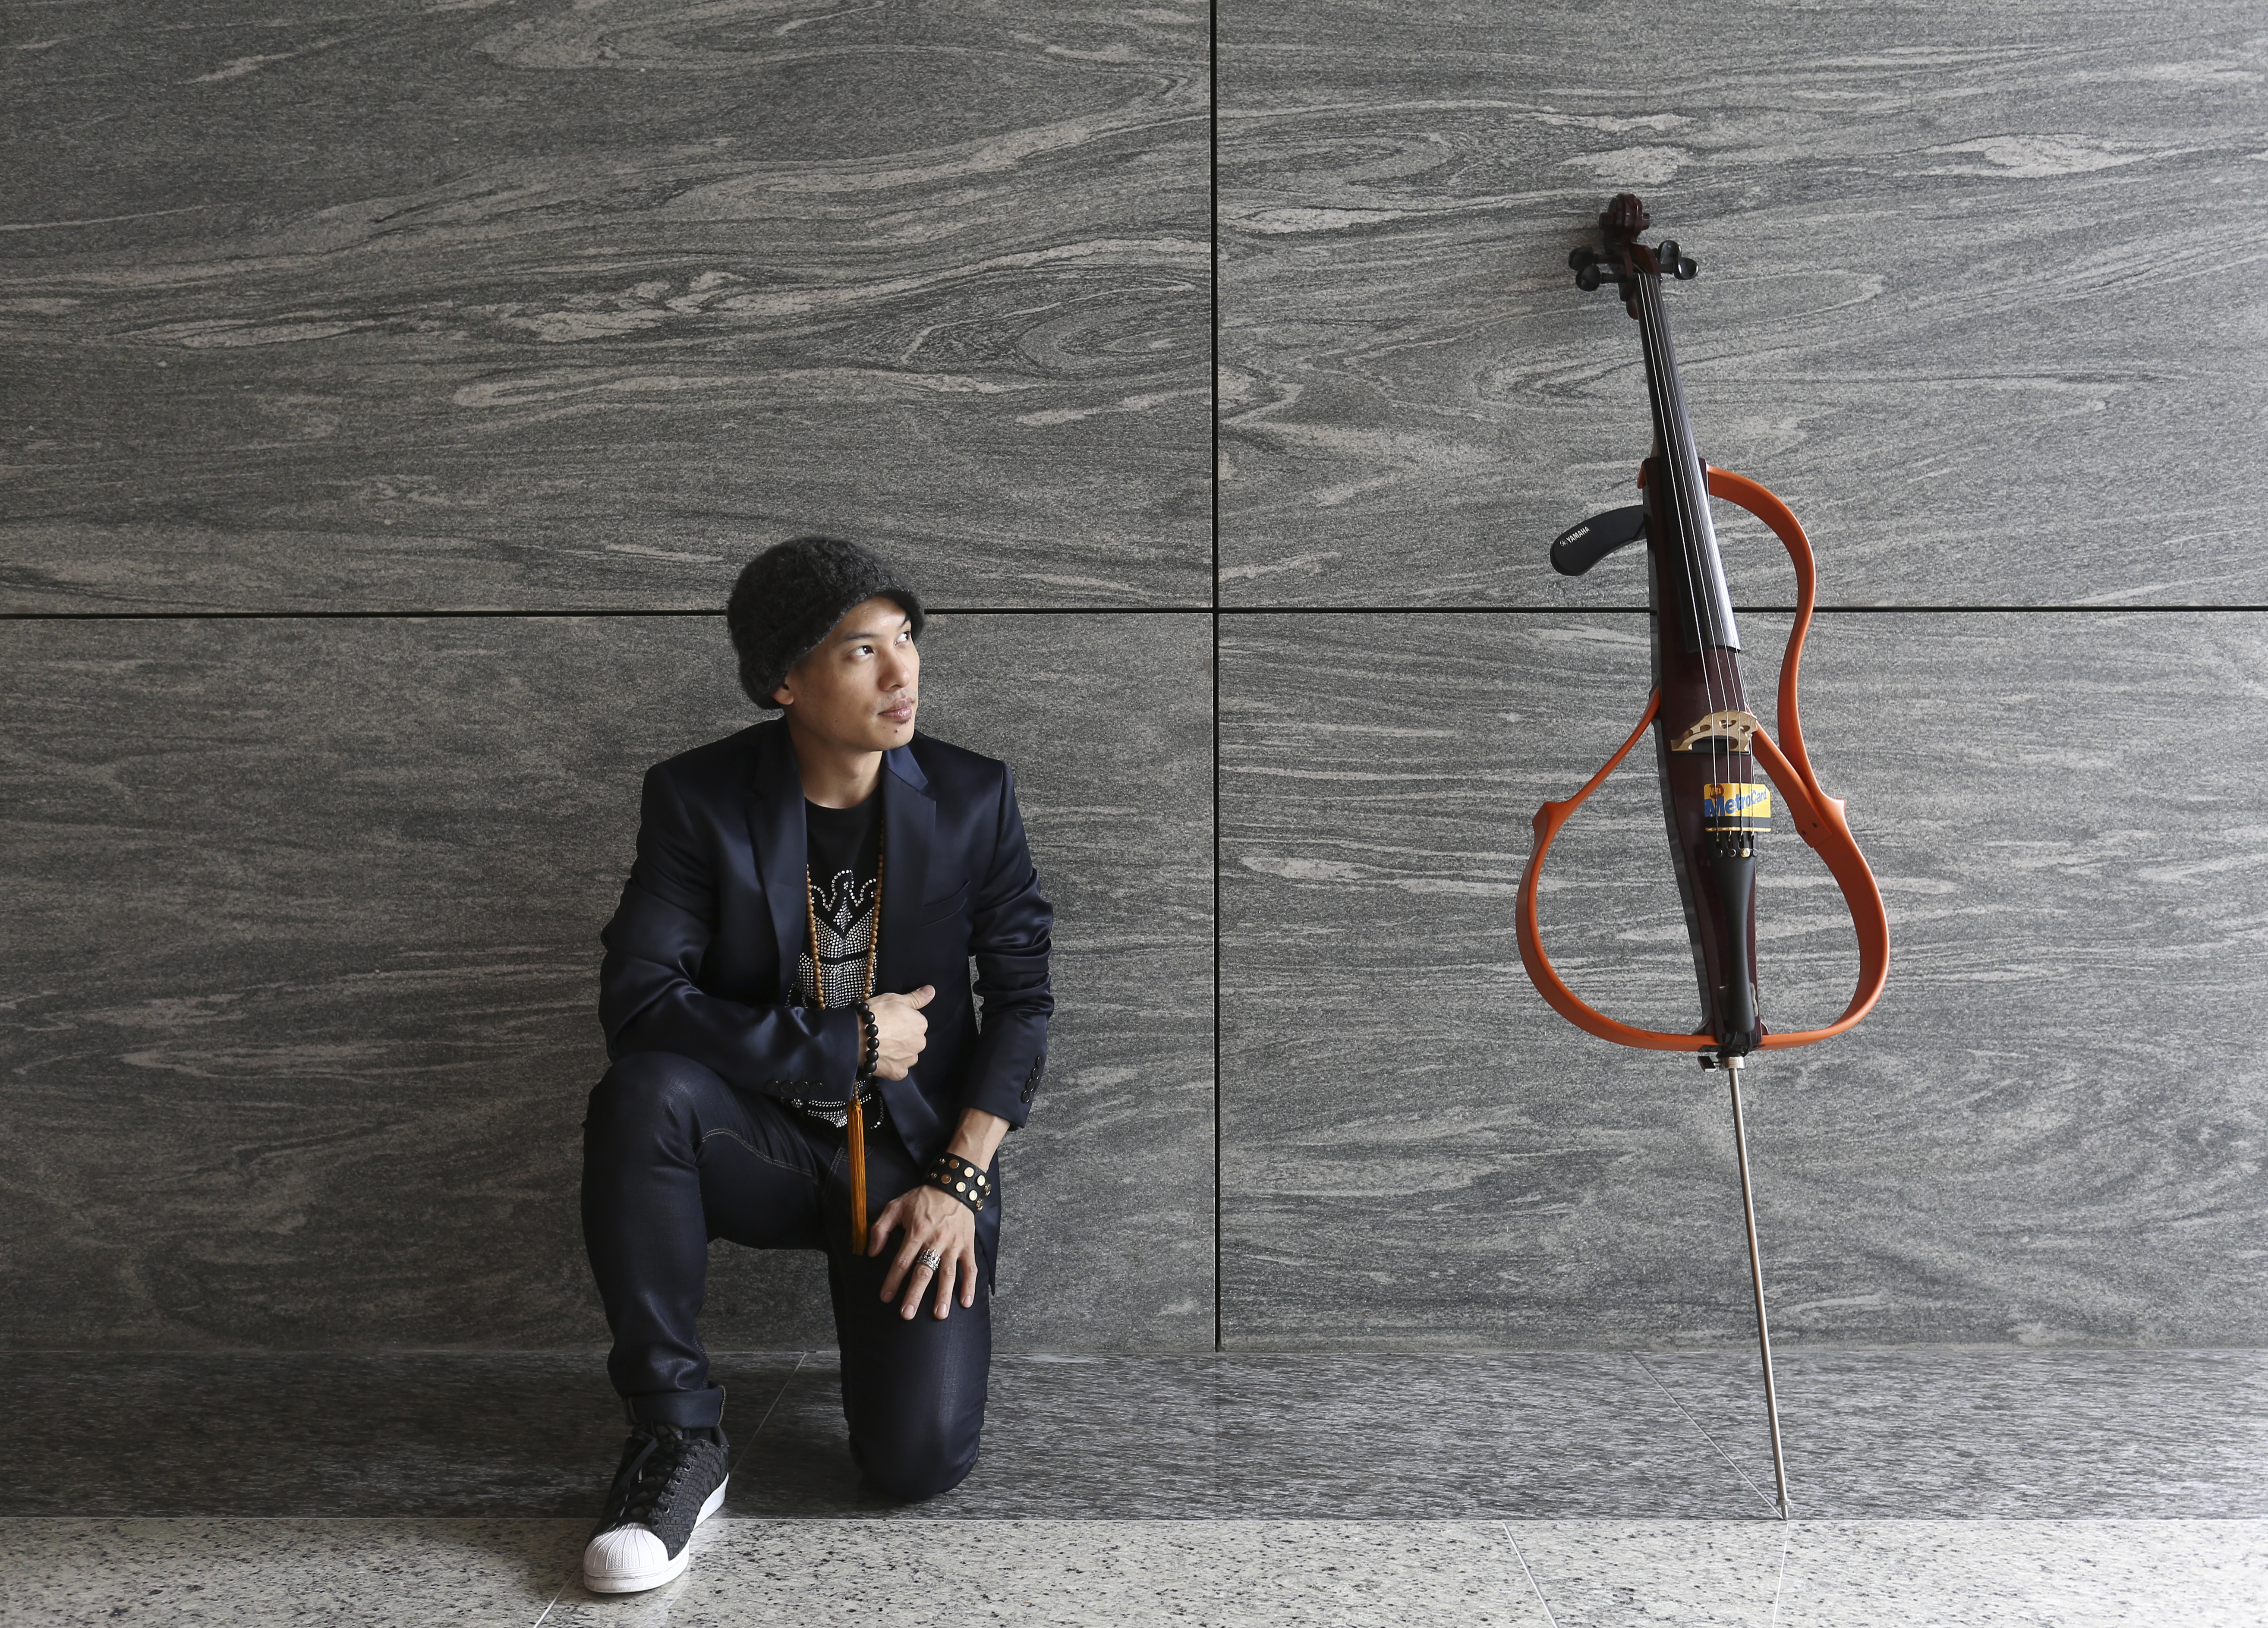 This image shows Dana Leong, Cellist, who will perform at the Save The Children gala, 2015 [LIFE BROADSHEET]